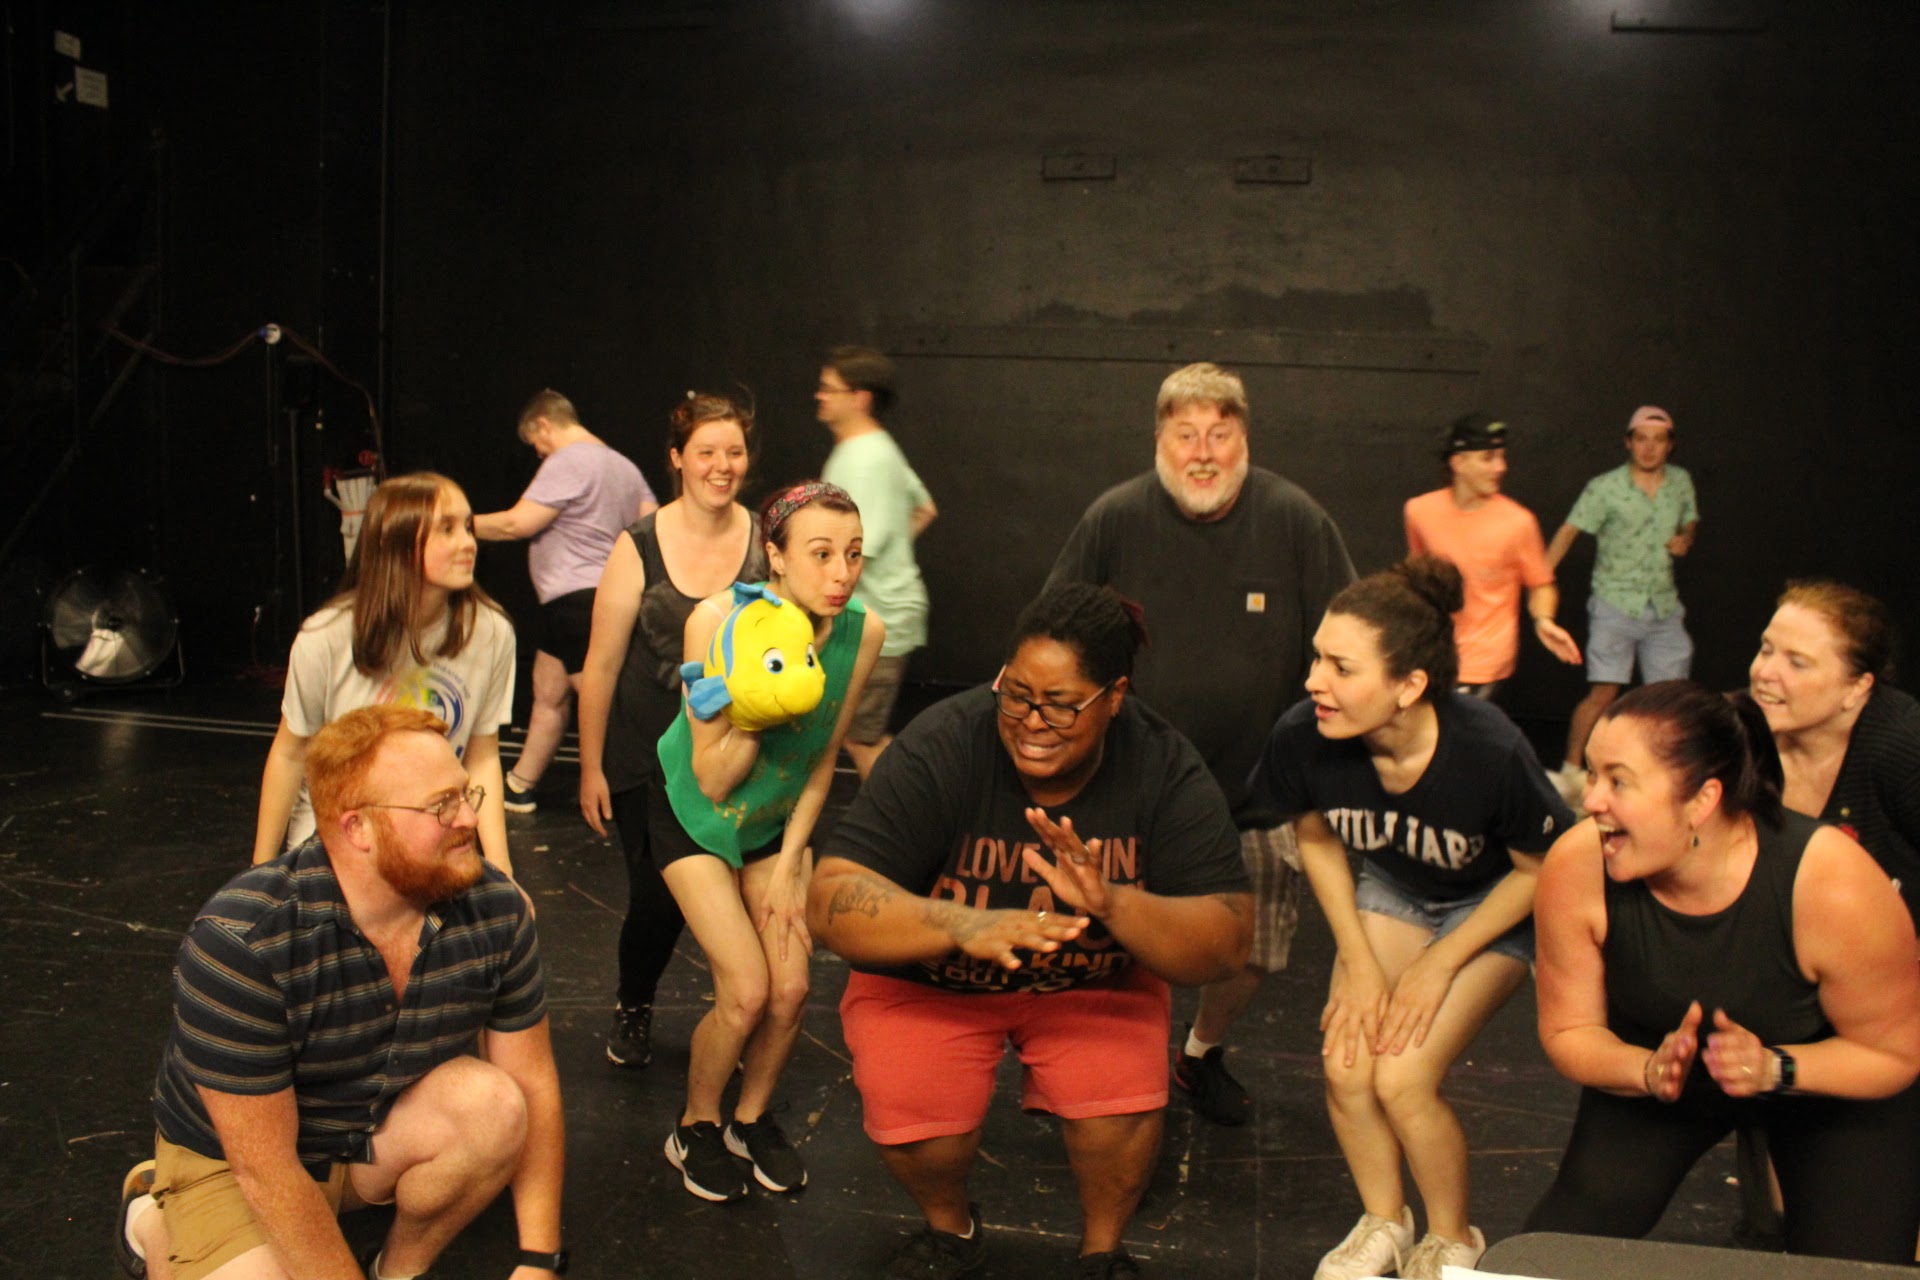 Cast members of Community Little Theatre's production of The Little Mermaid are pictured here rehearsing a scene from the show. From left in front and center are Cody Watson, Ellie Pfohl, Leslie Reed, Germaine Robinson, Mackenzie Richard, Lacey Moyse, and Mary Melquist. In back are Karen McArthur, Birdie Gay, Brian Pfohl, Iver McLeod, Brock Rancourt, and Scotty Venable.